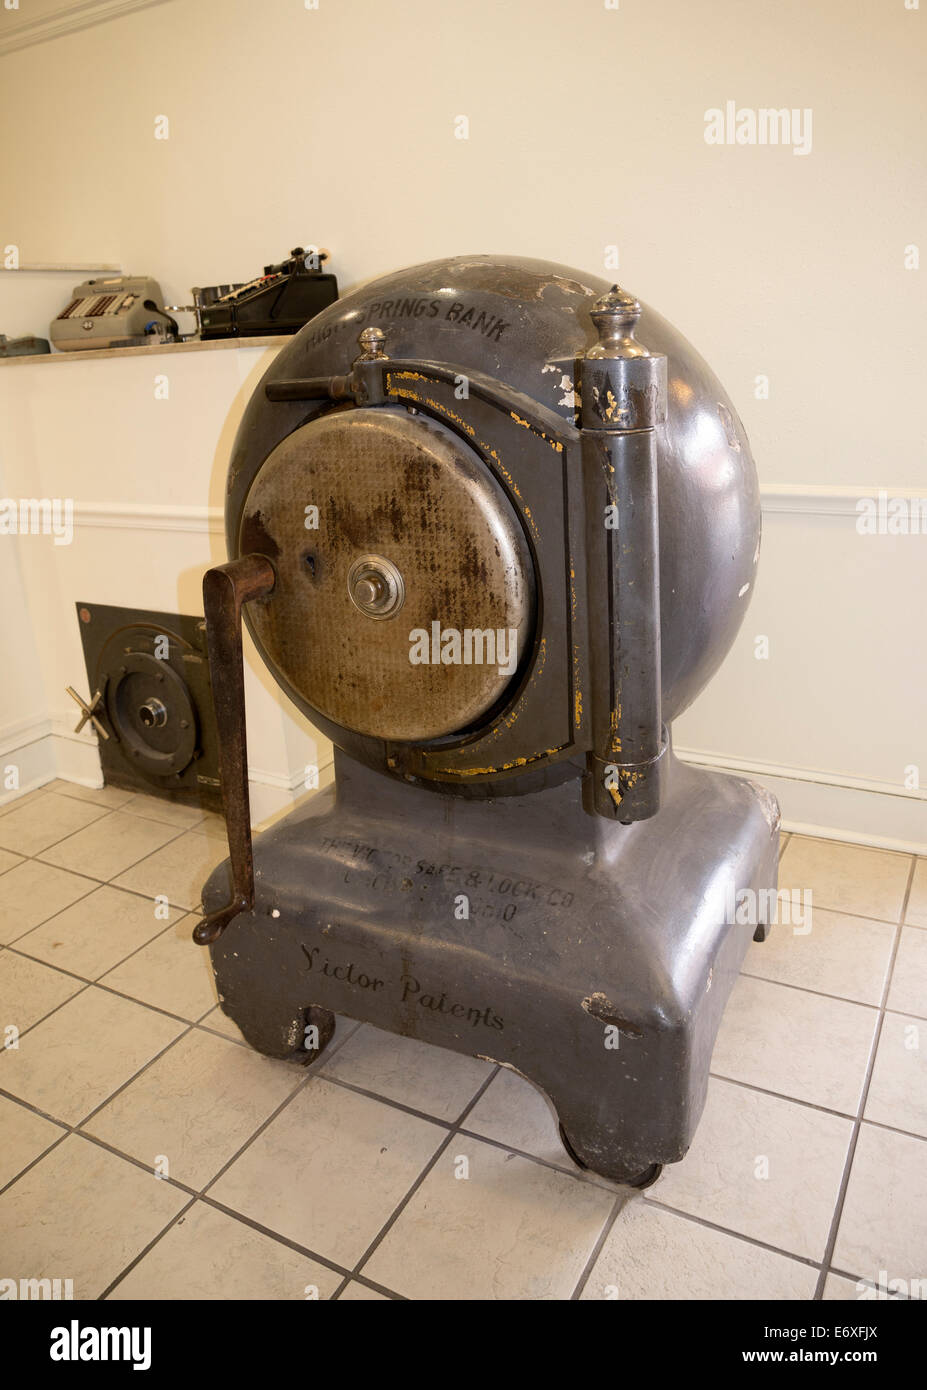 In the 1860’s to 1920’s “Cannonball Safes” were considered to be virtually “robbery Proof”. This one is on display in a bank. Stock Photo